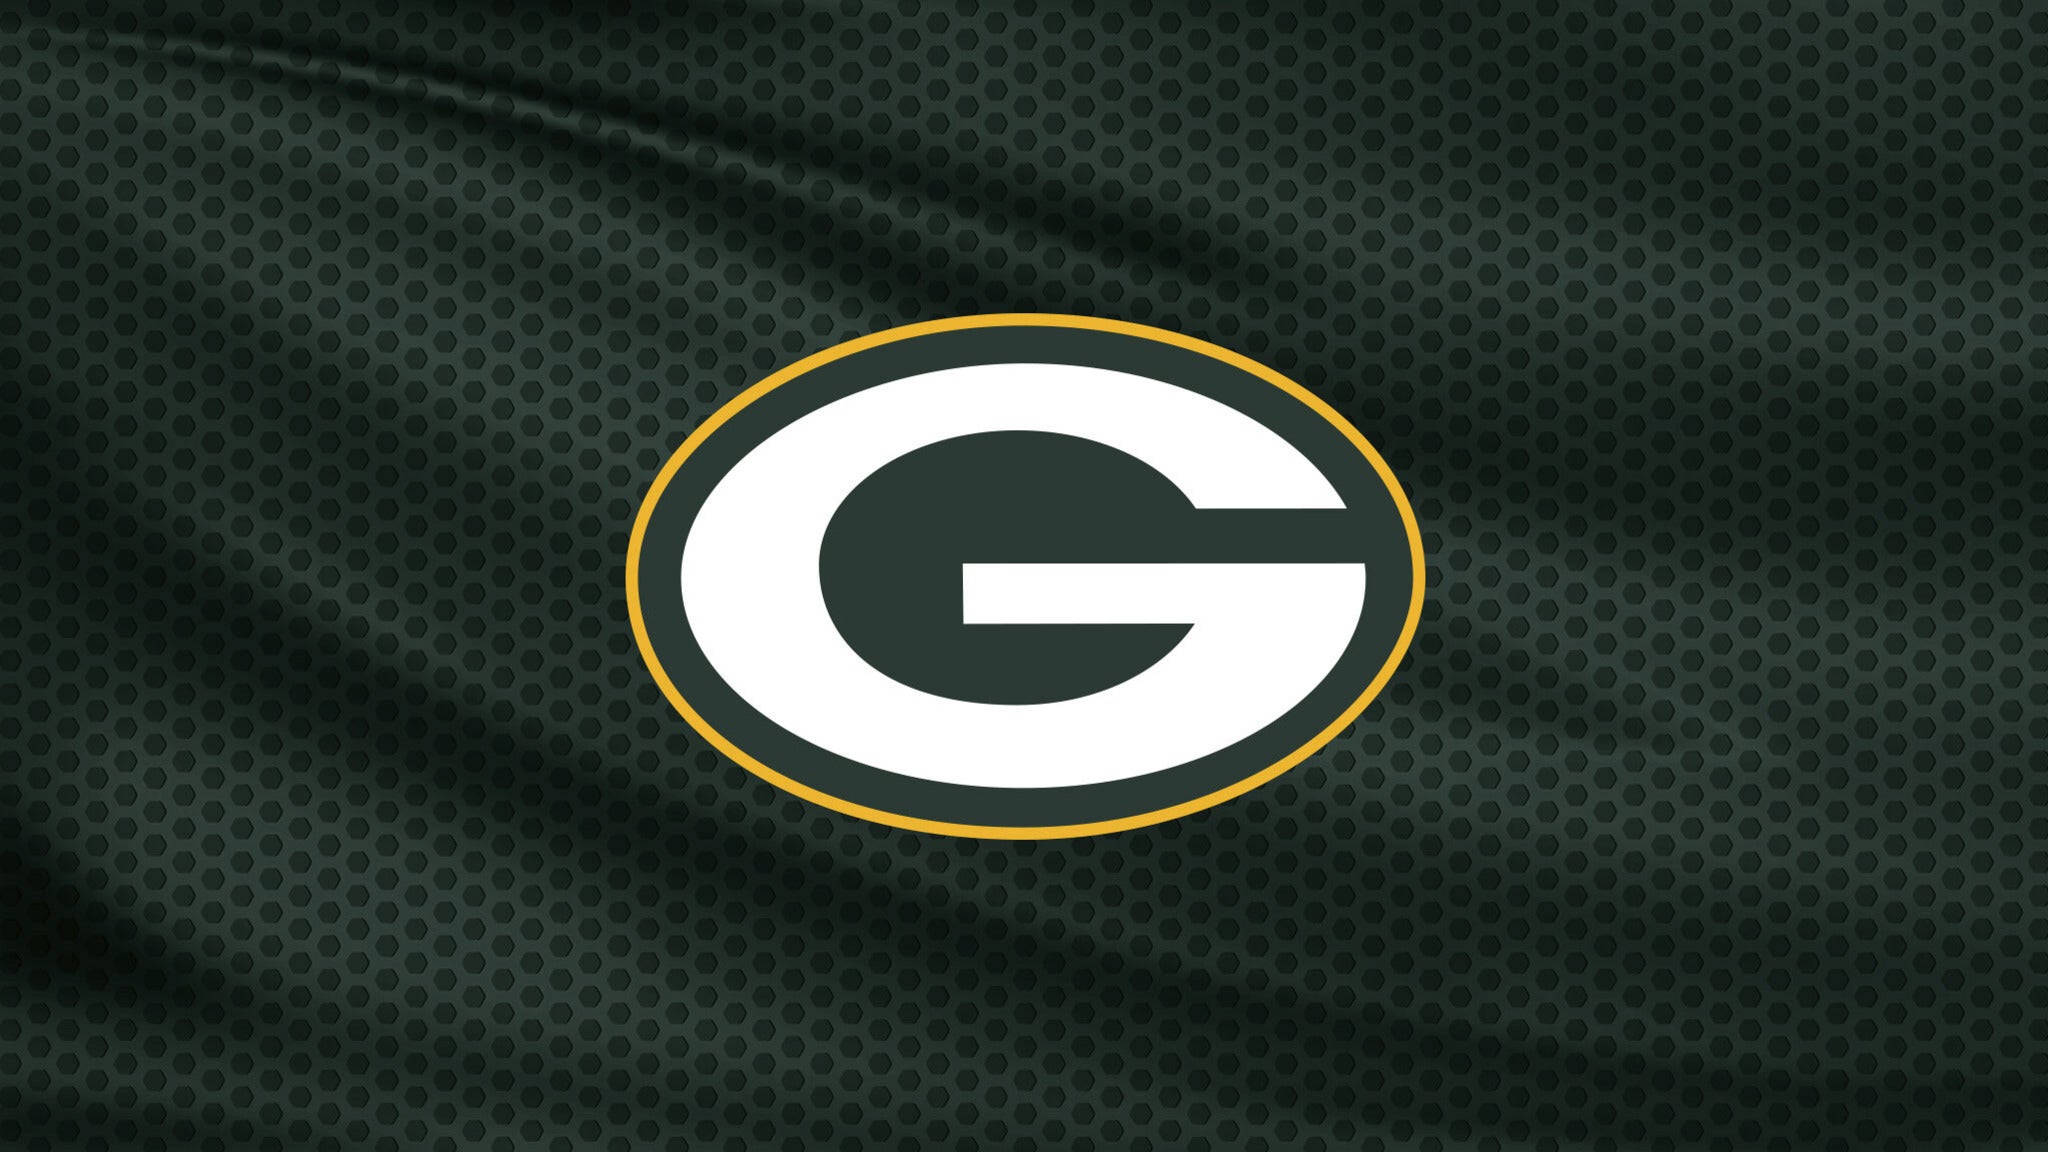 Green Bay Packers Tickets, 2023 NFL Tickets & Schedule